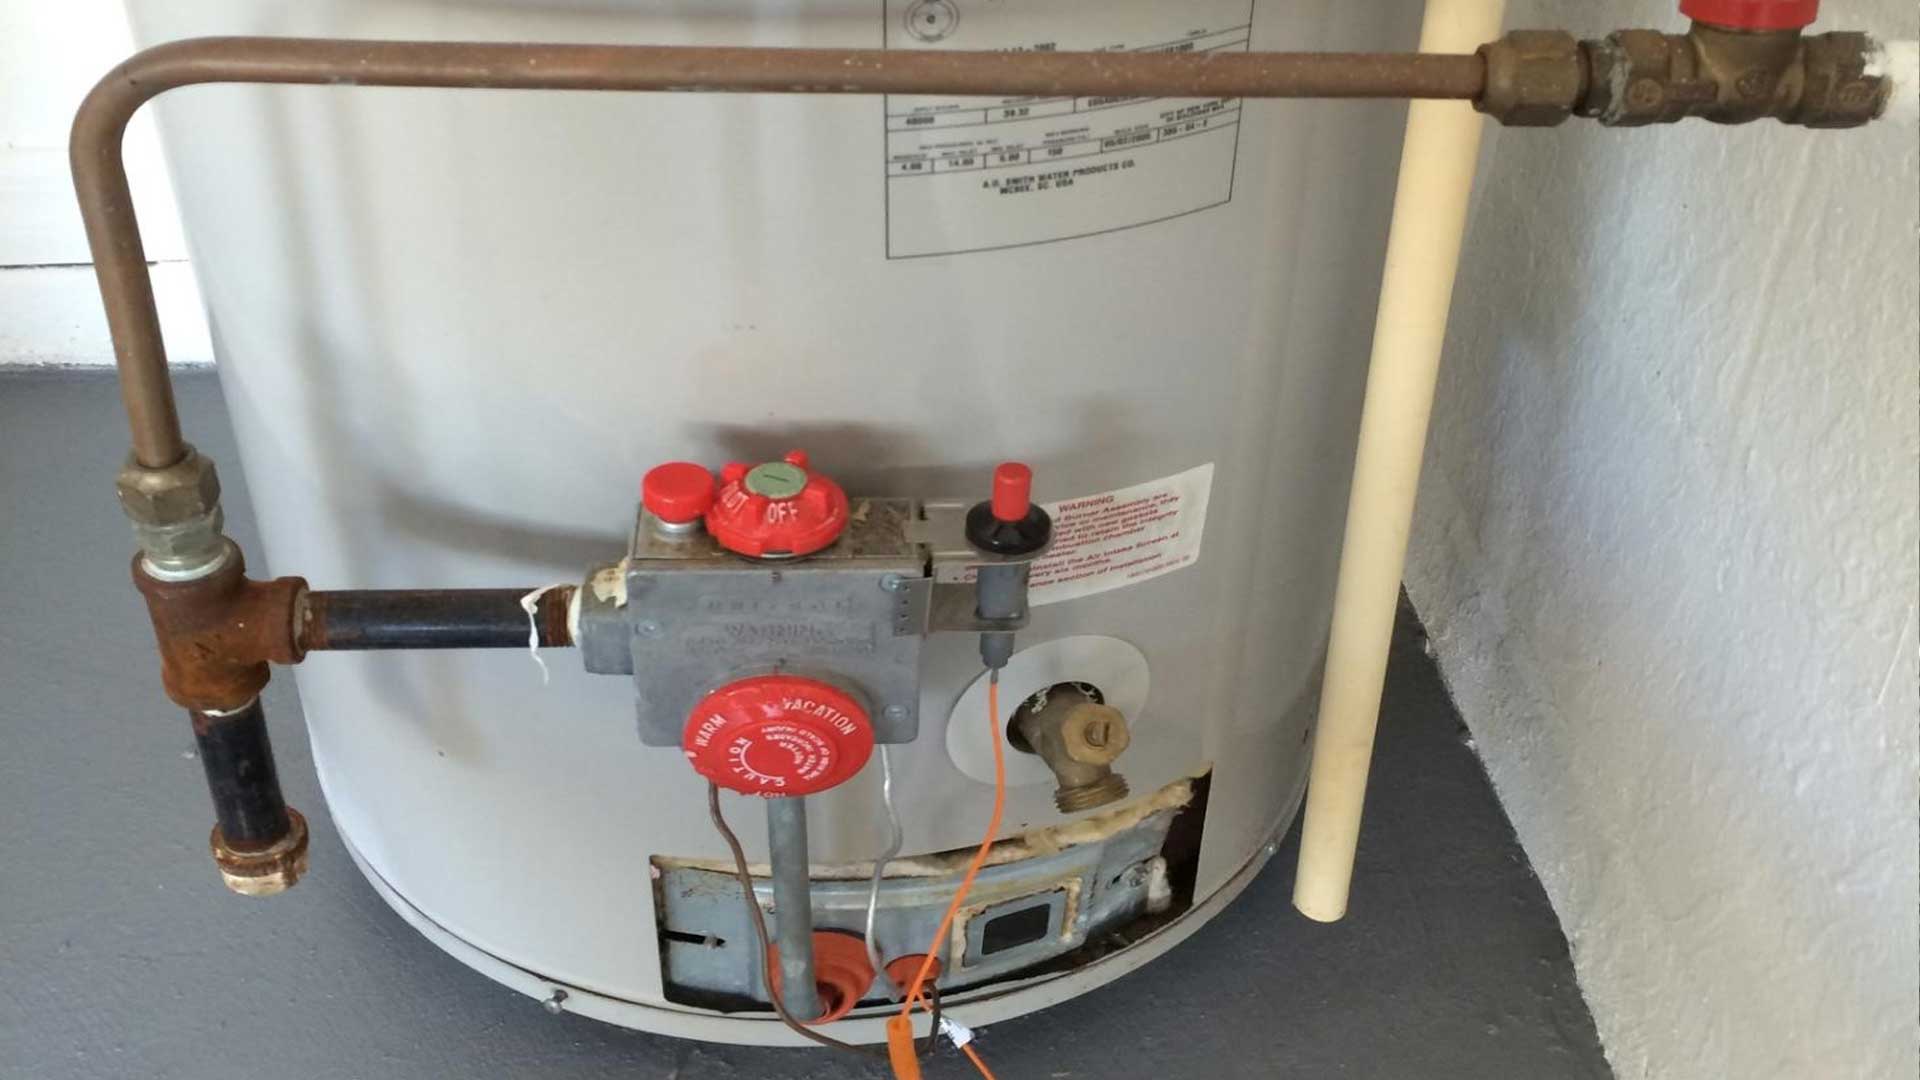 5 Indicators Your Water Heater Needs to be Replaced